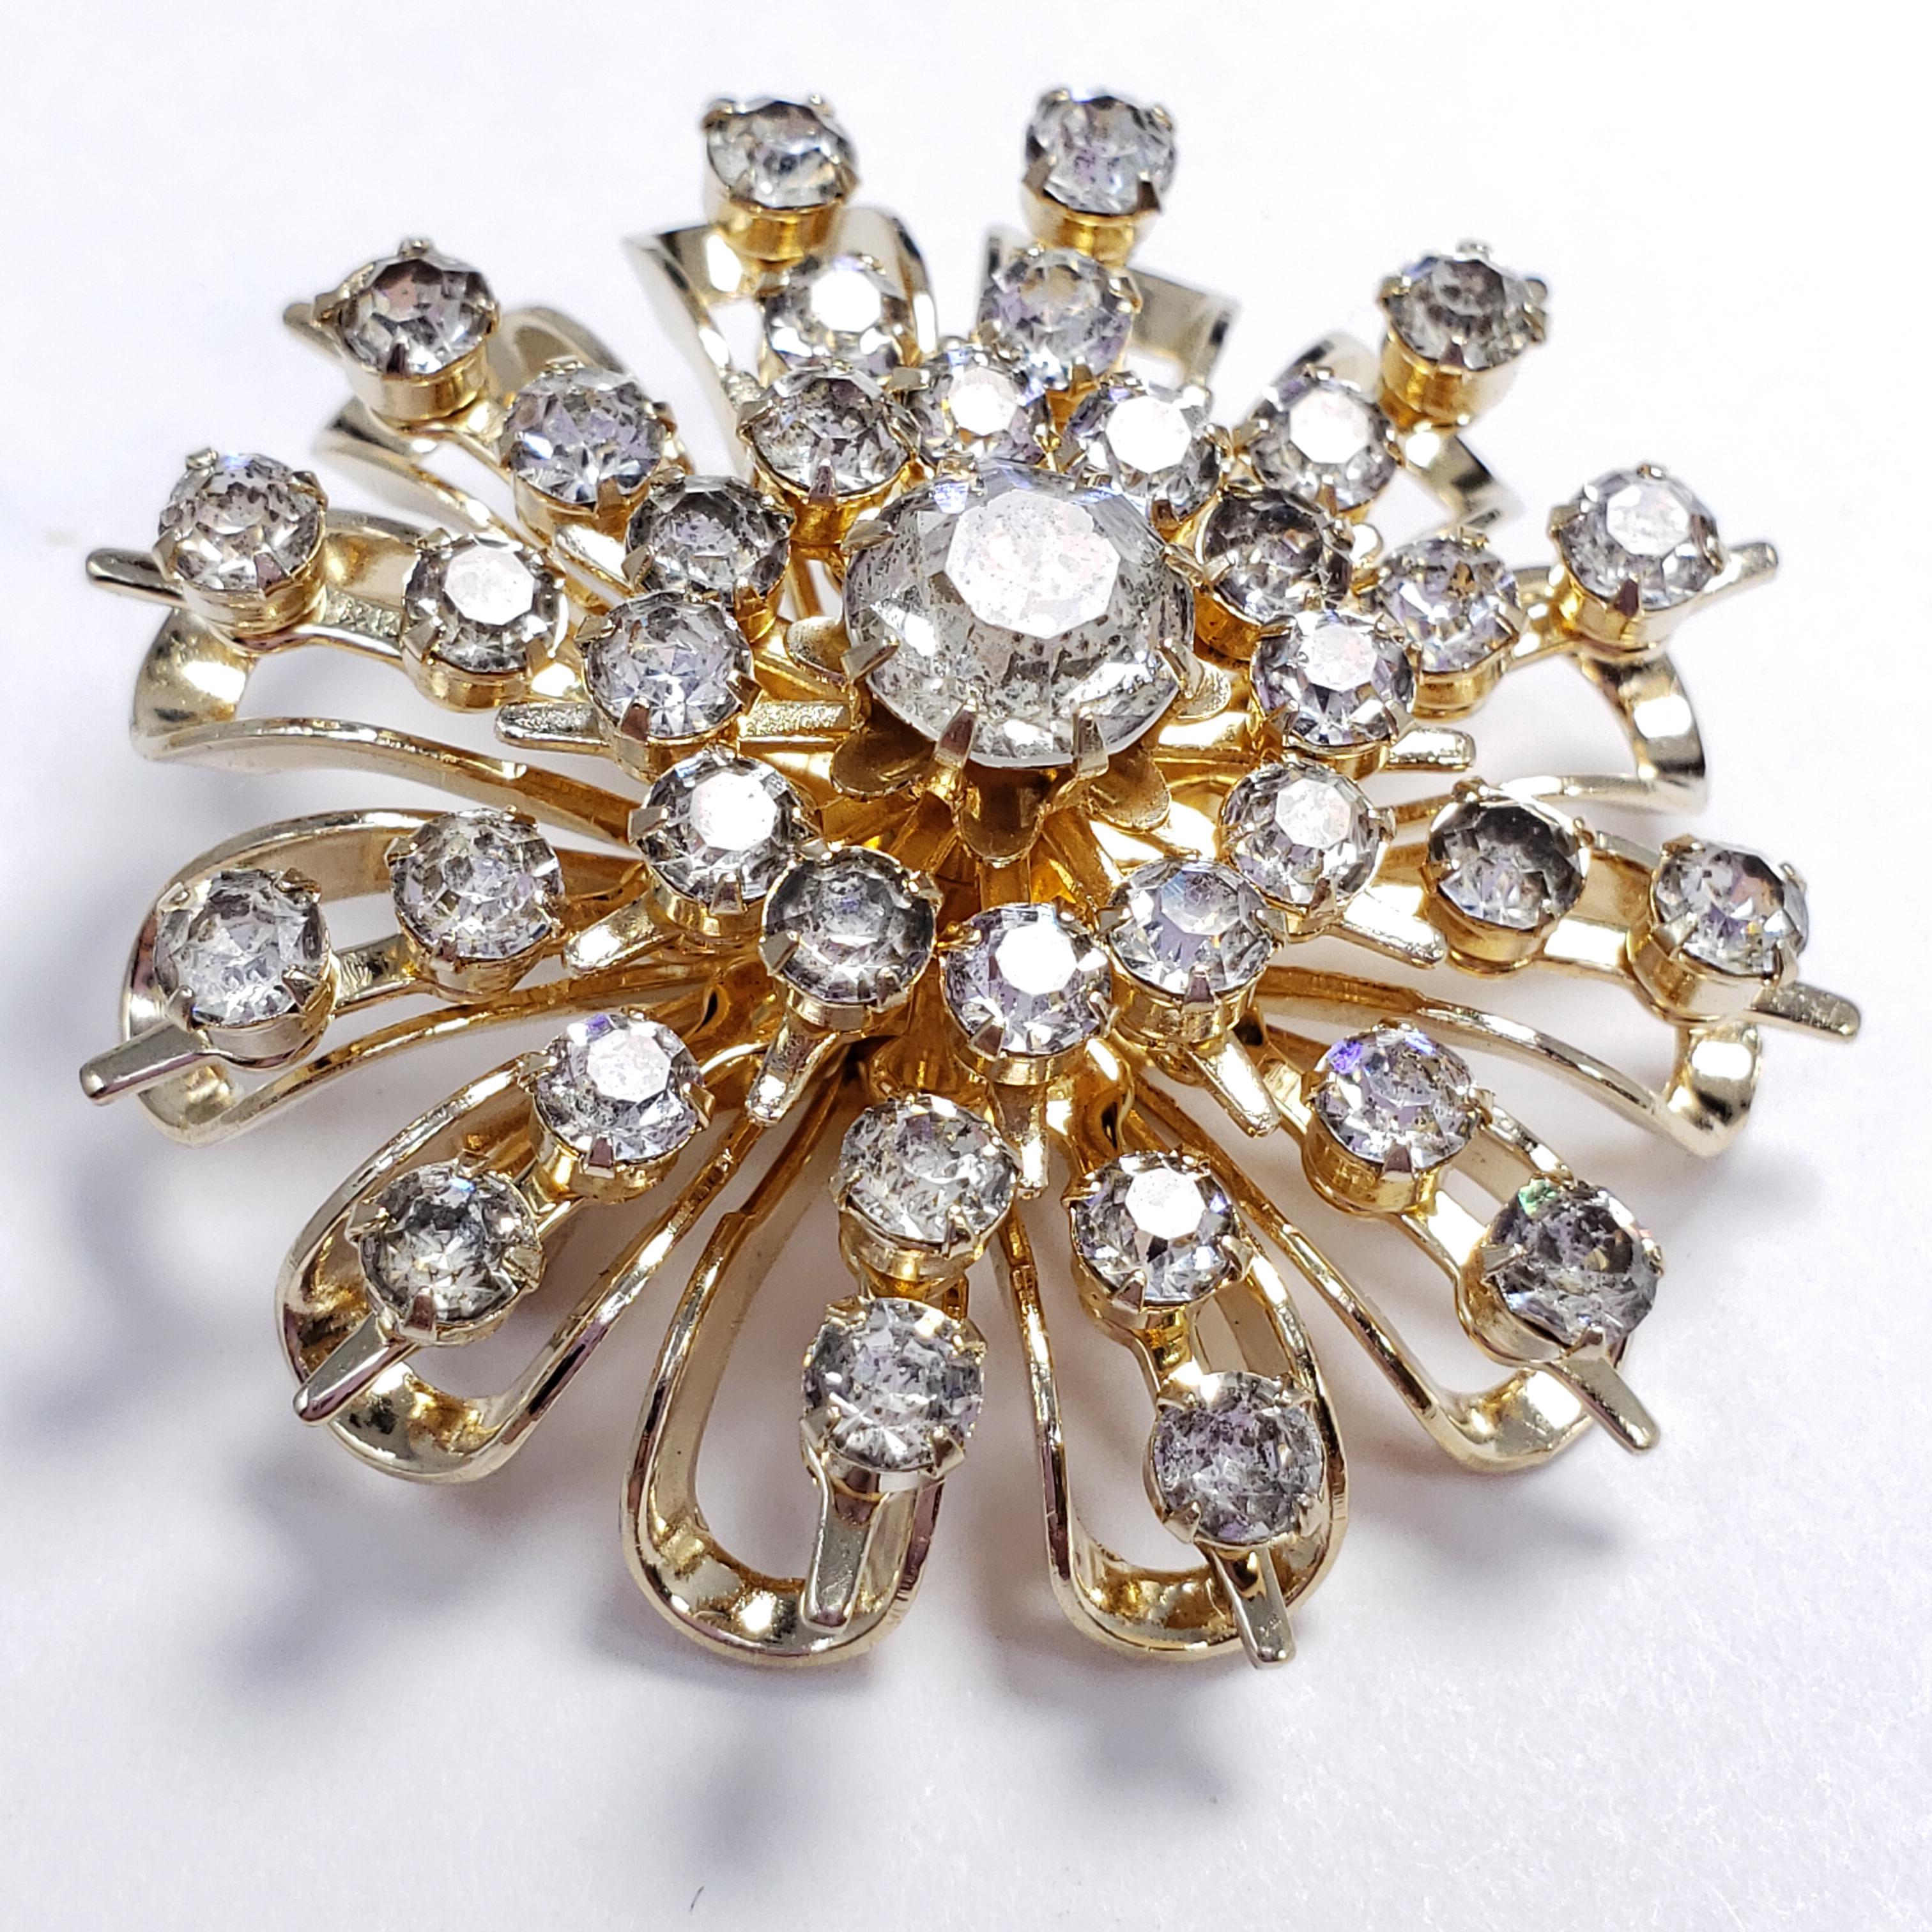 A vintage collector's pin brooch by Coro. Features a gold-tone flower motif accented with clear, prong-set crystals. A mesmerizing accessory!

Hallmarks: Coro, DES Pat Pend